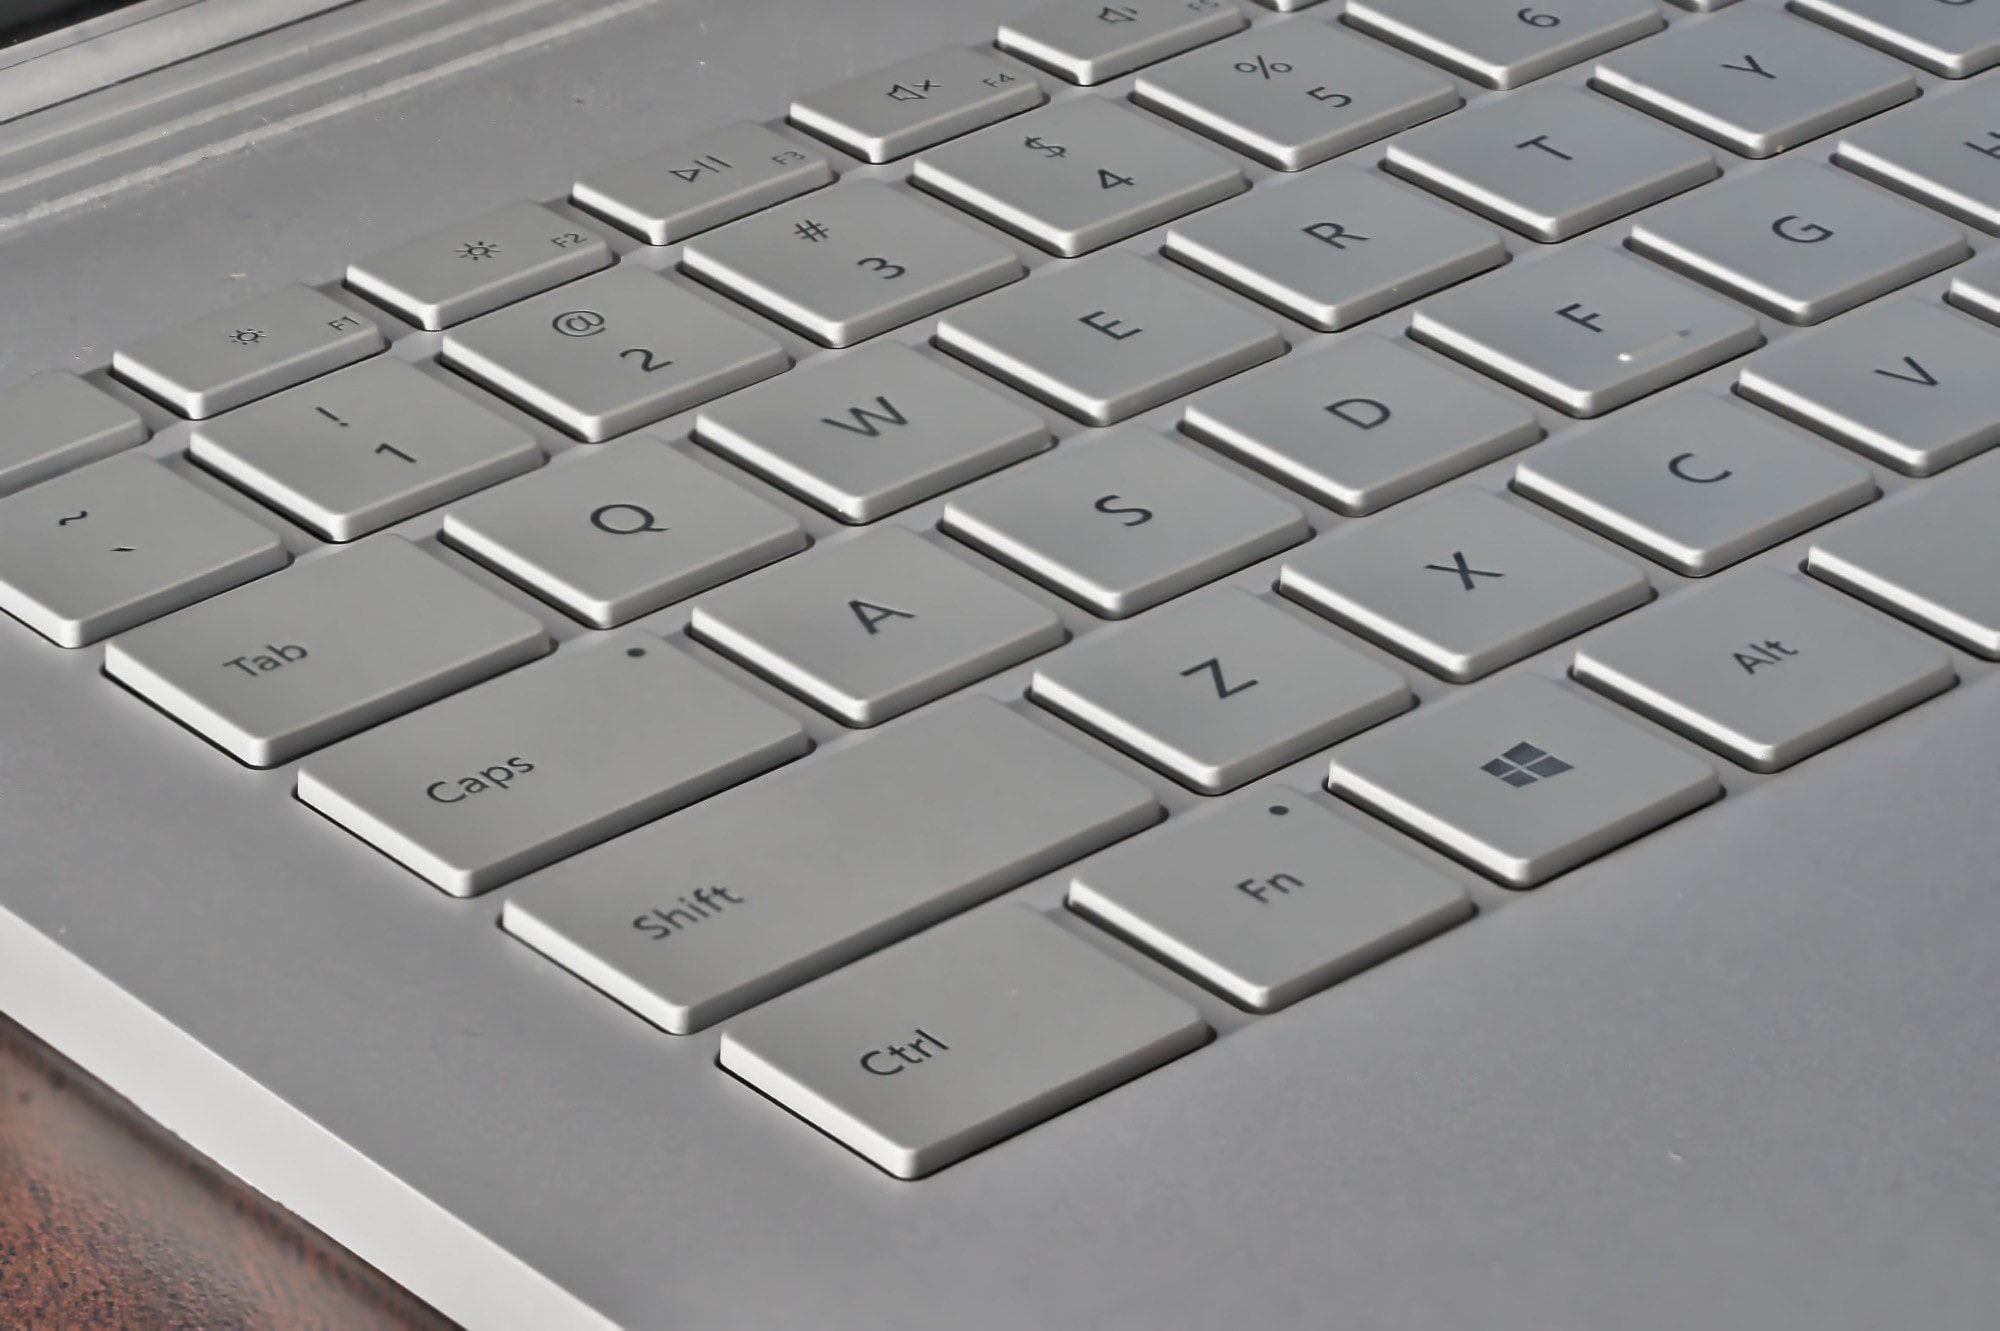 Macbook alternatives: The Surface Book comes with a 100%-working keyboard.